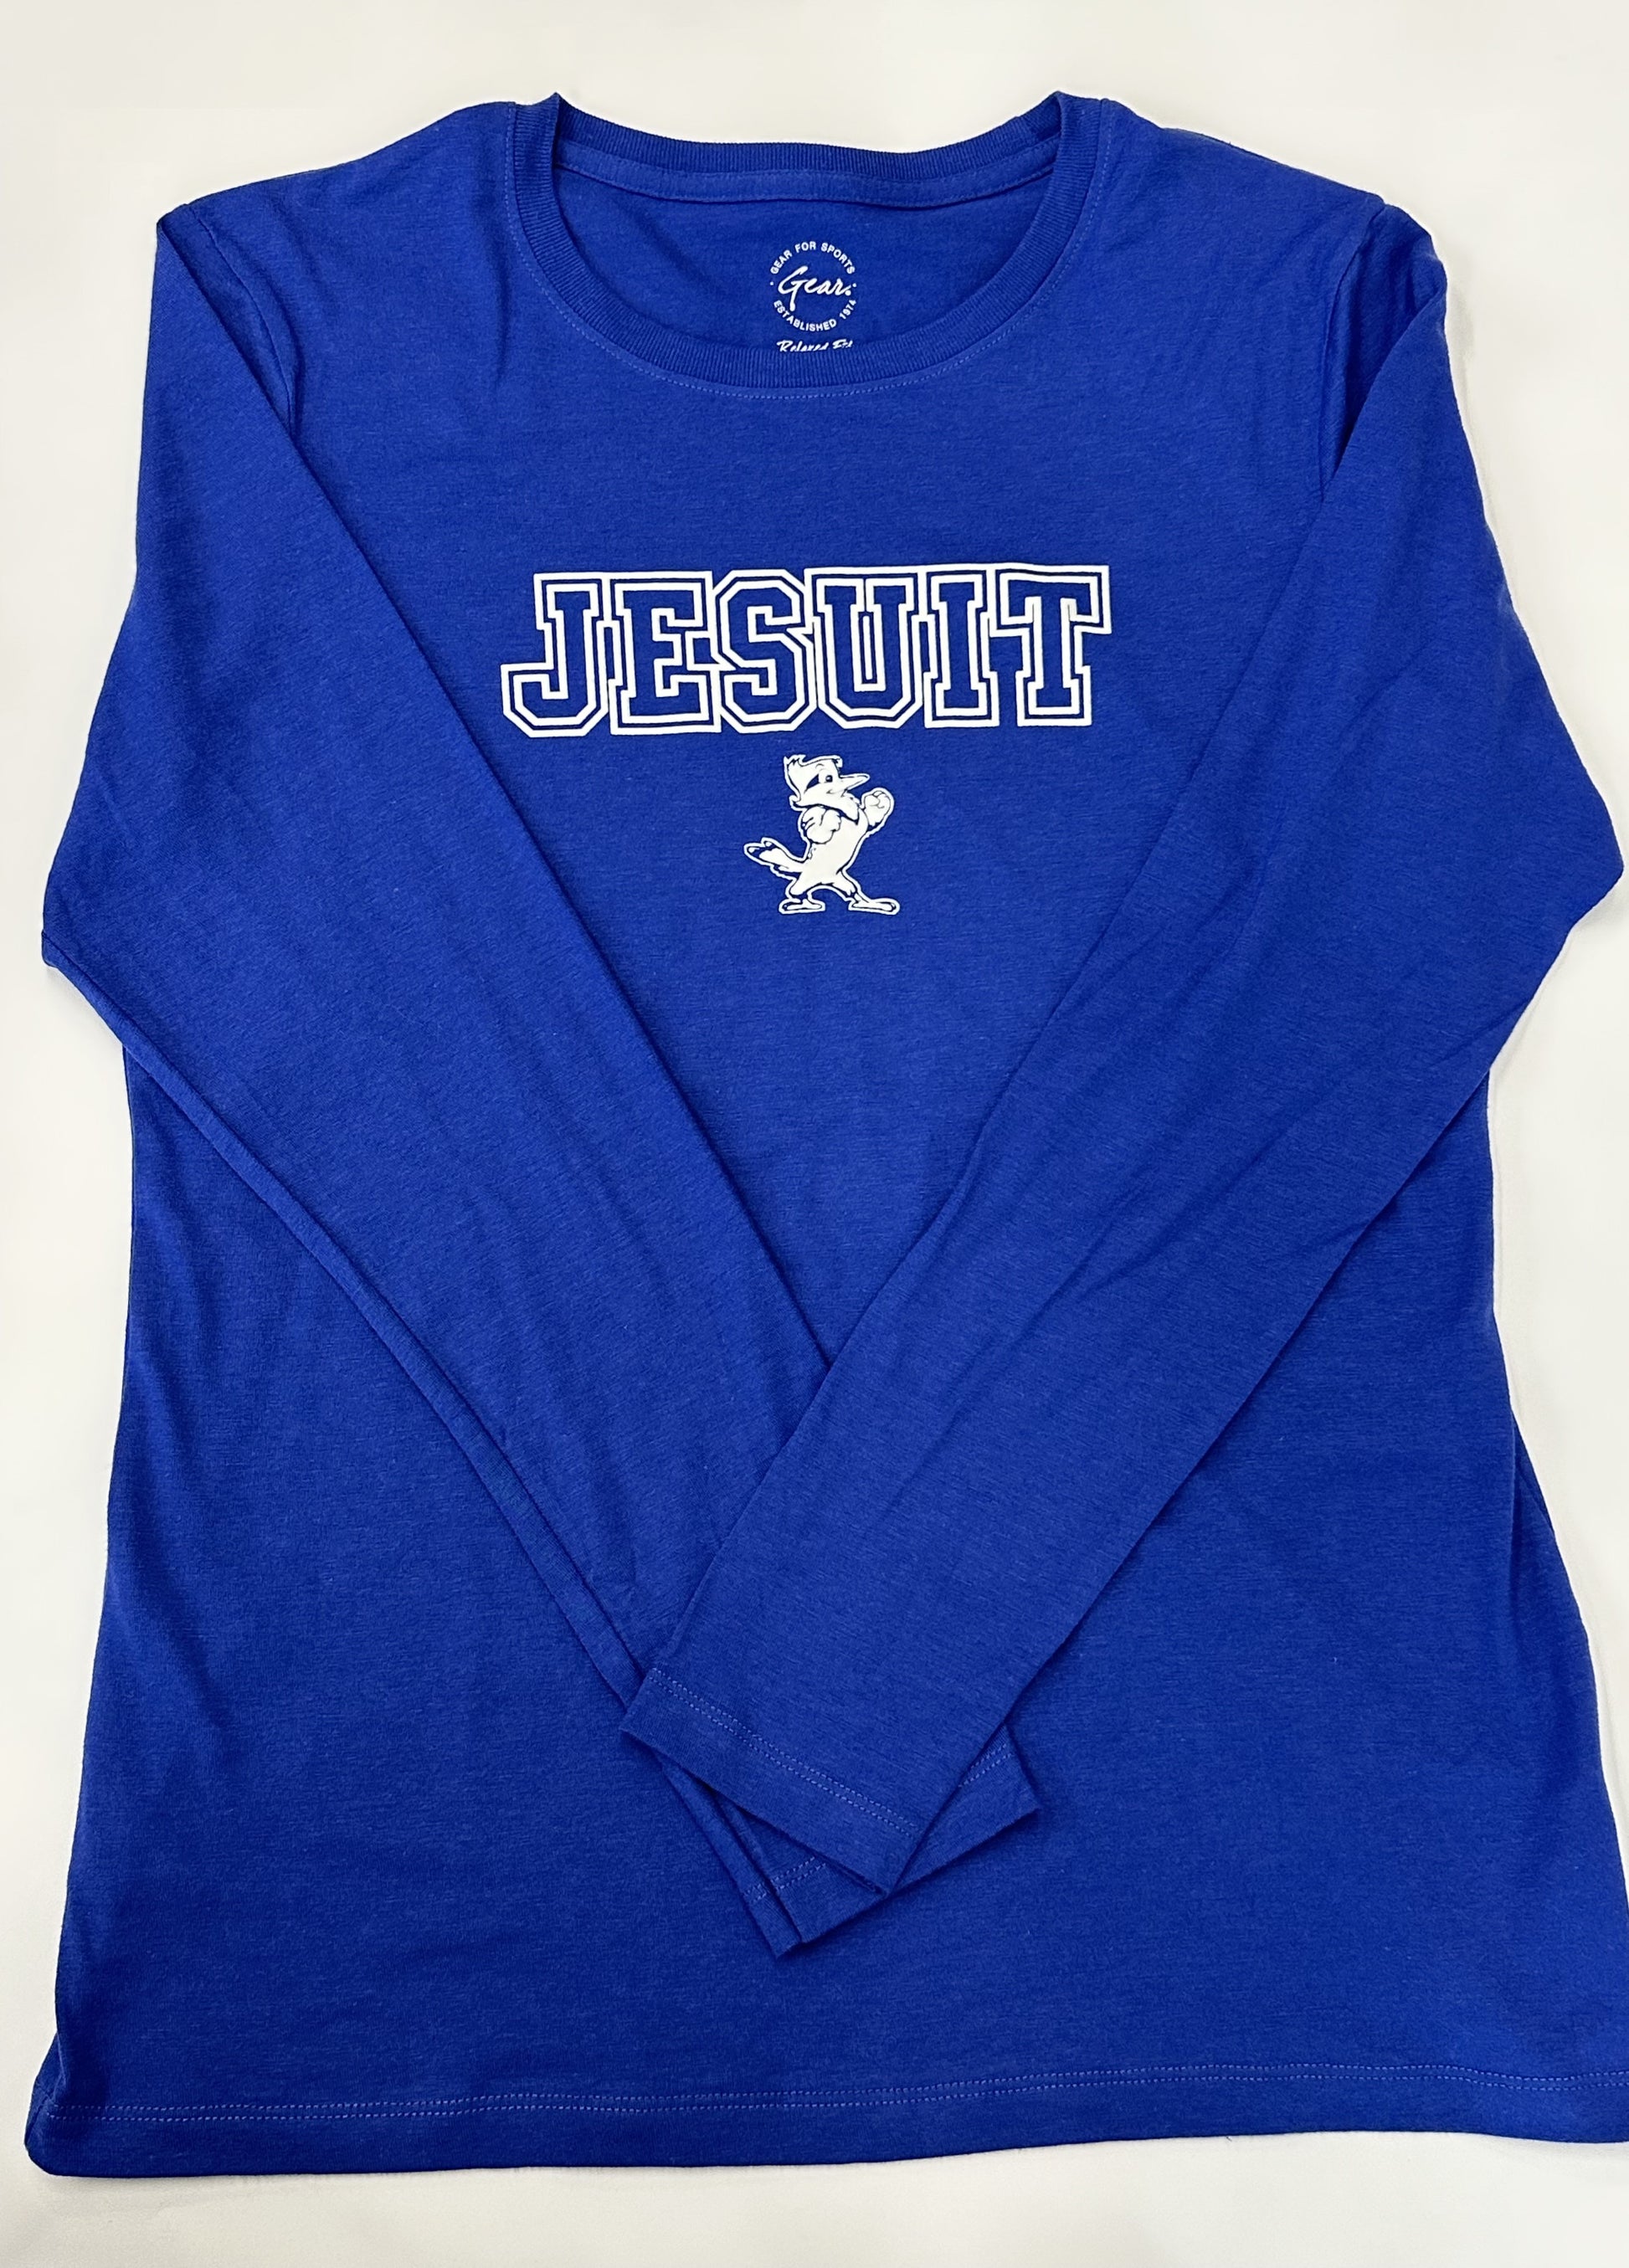 Gear for Sports  60% Cotton/40% Polyester.  Relaxed Fit.